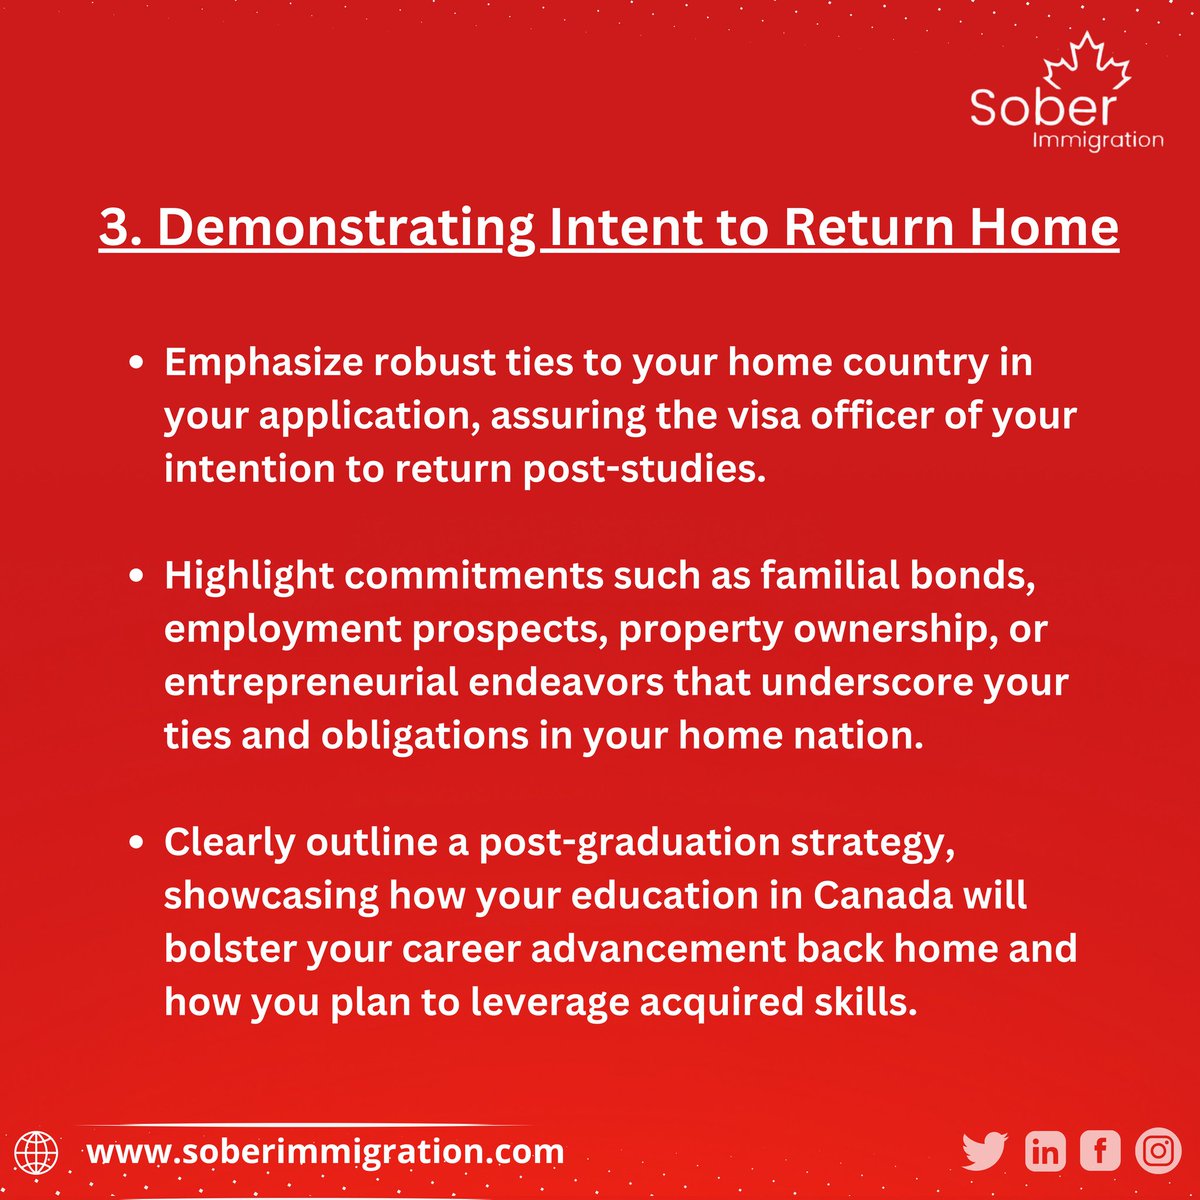 Understanding the Top 3 Reasons for Study Permit Refusals: Don't Let These Obstacles Derail Your Education Goals!'
.
.
.
.
.
.
.
.

#StudyPermit #RefusalReasons #CanadaImmigration #StudentVisa #VisaRefusal #ImmigrationObstacles #StudyAbroad #EducationGoals #ImmigrationChallenges